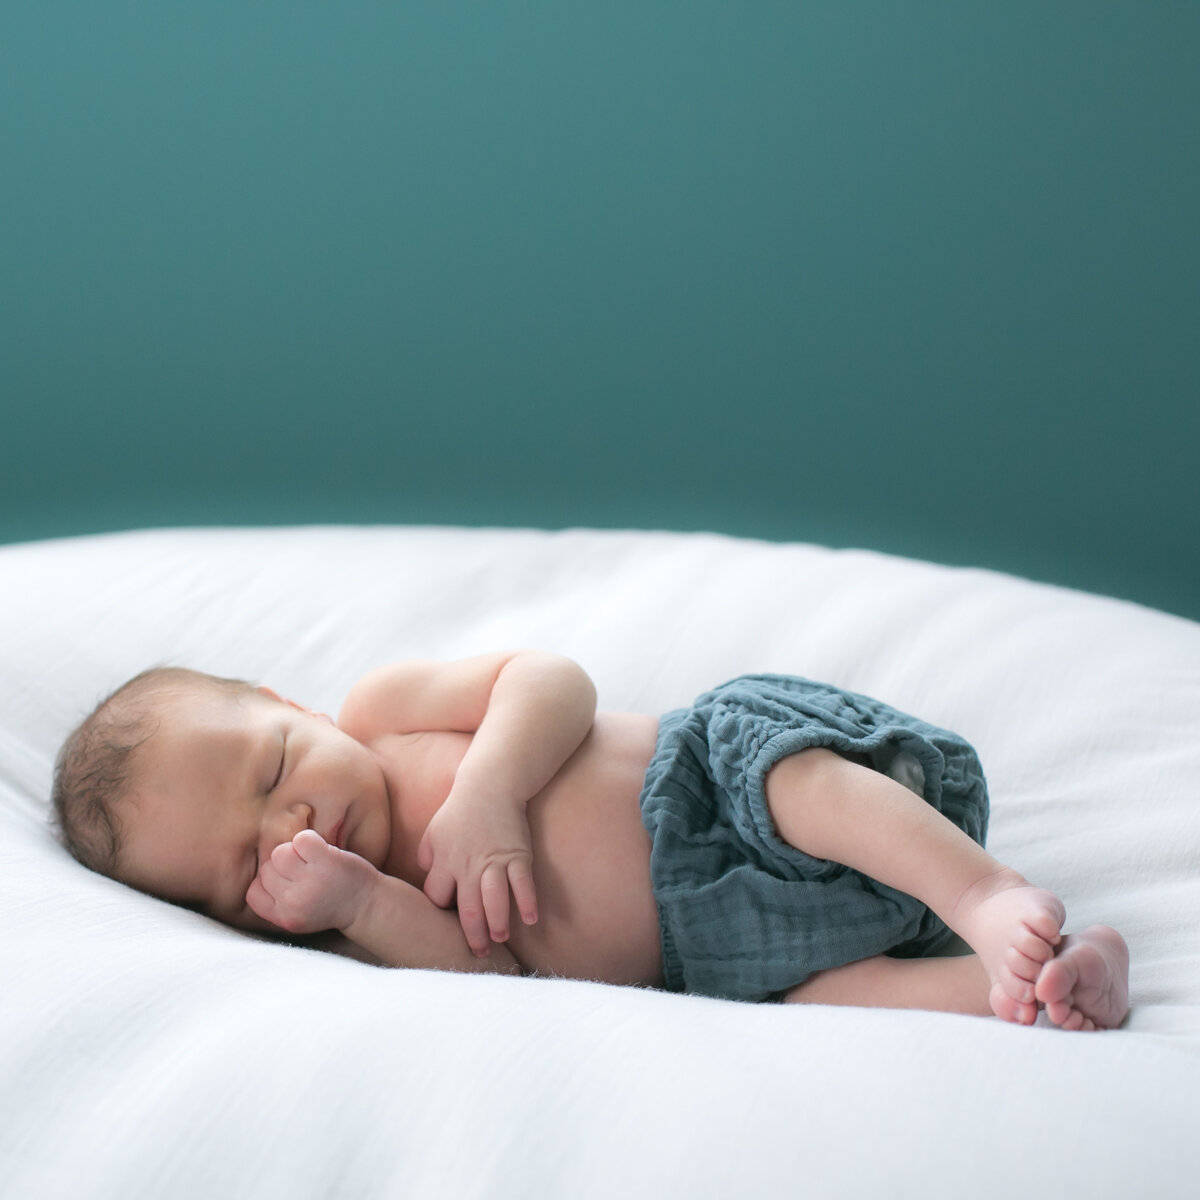 Bright_Photography_Newborn_Home_Session_Siblings-2.jpg